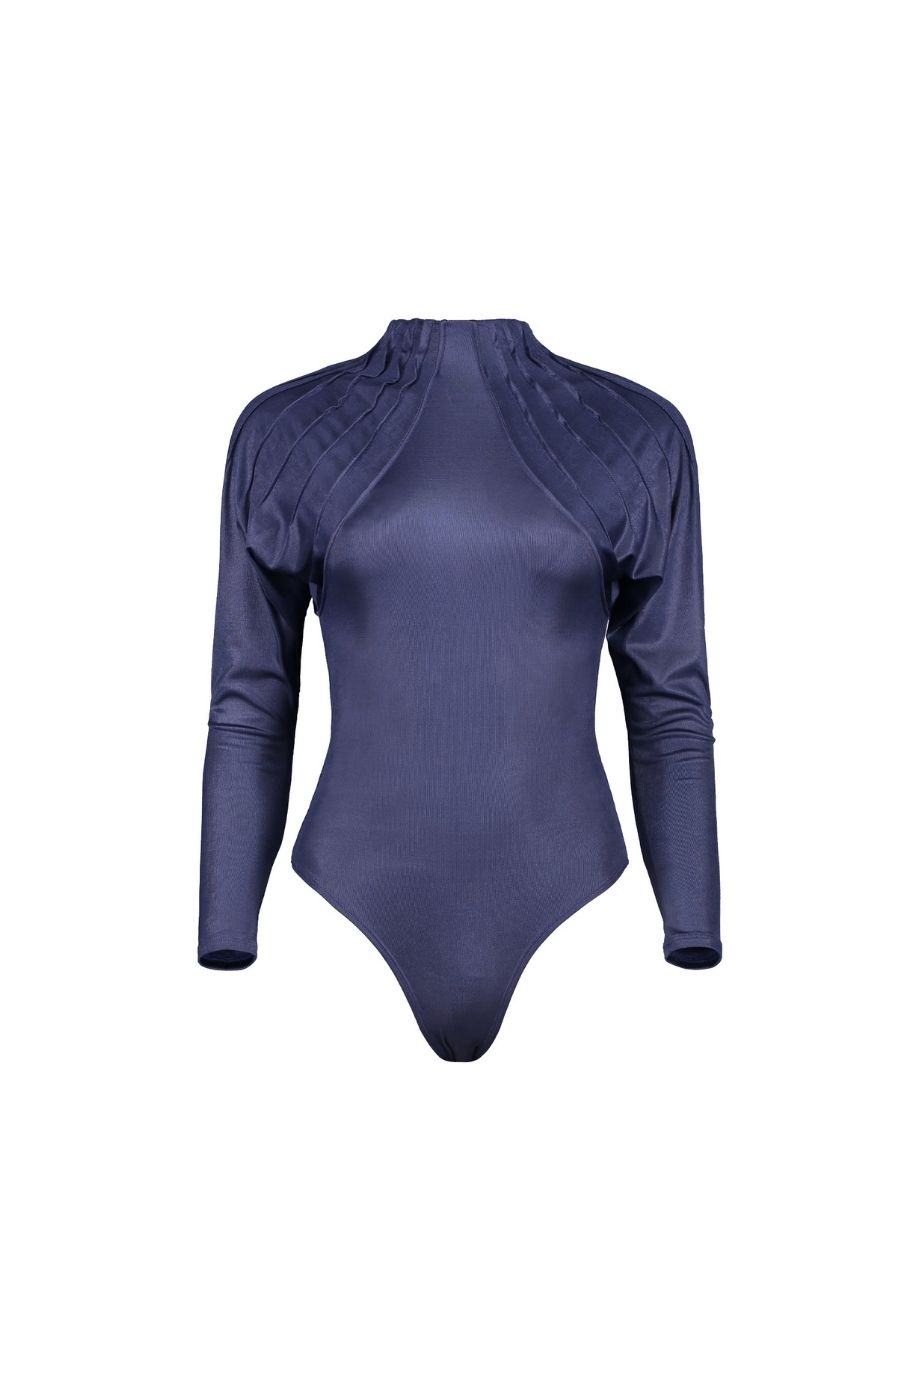 TURTLENECK BODYSUIT  WITH PINTUCKS AND OPEN BACK

Composition: 80% Nylon- 20% Spandex

Care Instructions: Machine wash in cold water with similar colors on gentle cycle, do not soak for too long

Fit: Slim fit

Color:  Purple/blue

Size Chart

*DUE TO MONITOR DIFFERENCES, ACTUAL COLOR MAY VARY SLIGHTLY FROM WHAT APPEARS ONLINE*

*** THIS IS A LIMITED EDITION ITEM , NO RESTOCK ***